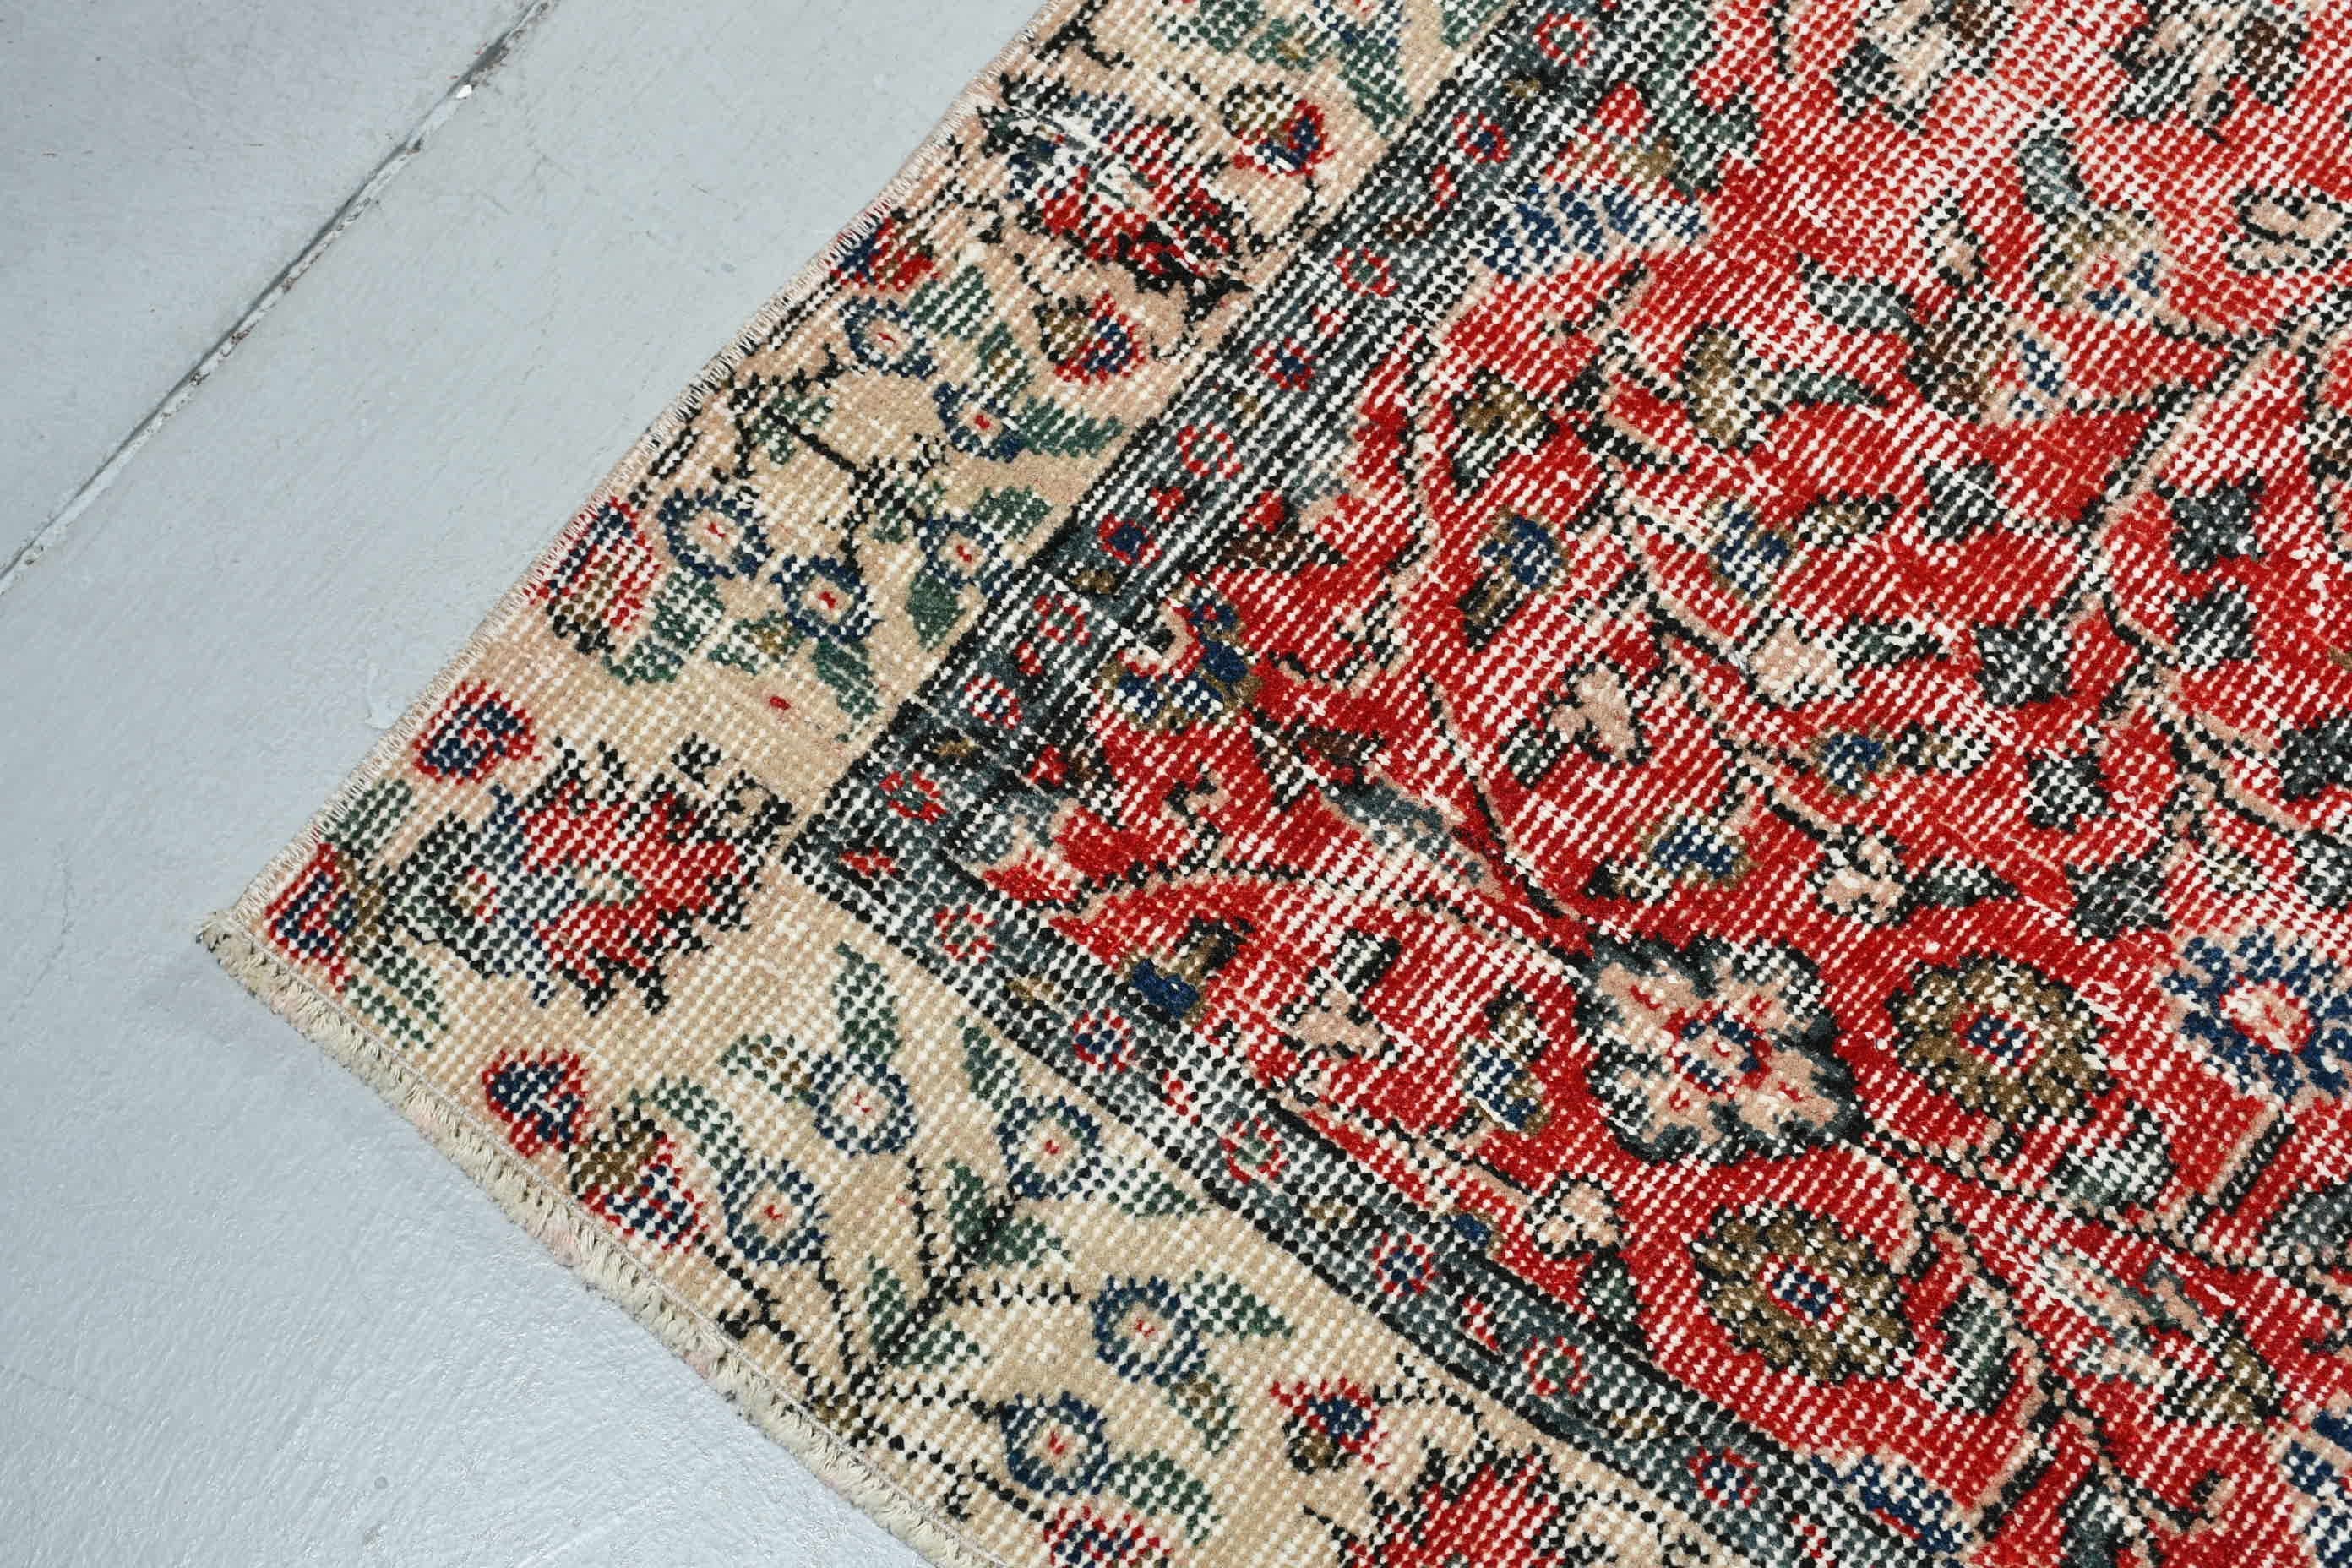 Vintage Rugs, 3.5x6.4 ft Accent Rugs, Kitchen Rug, Designer Rugs, Entry Rug, Turkish Rug, Red Oriental Rug, Anatolian Rugs